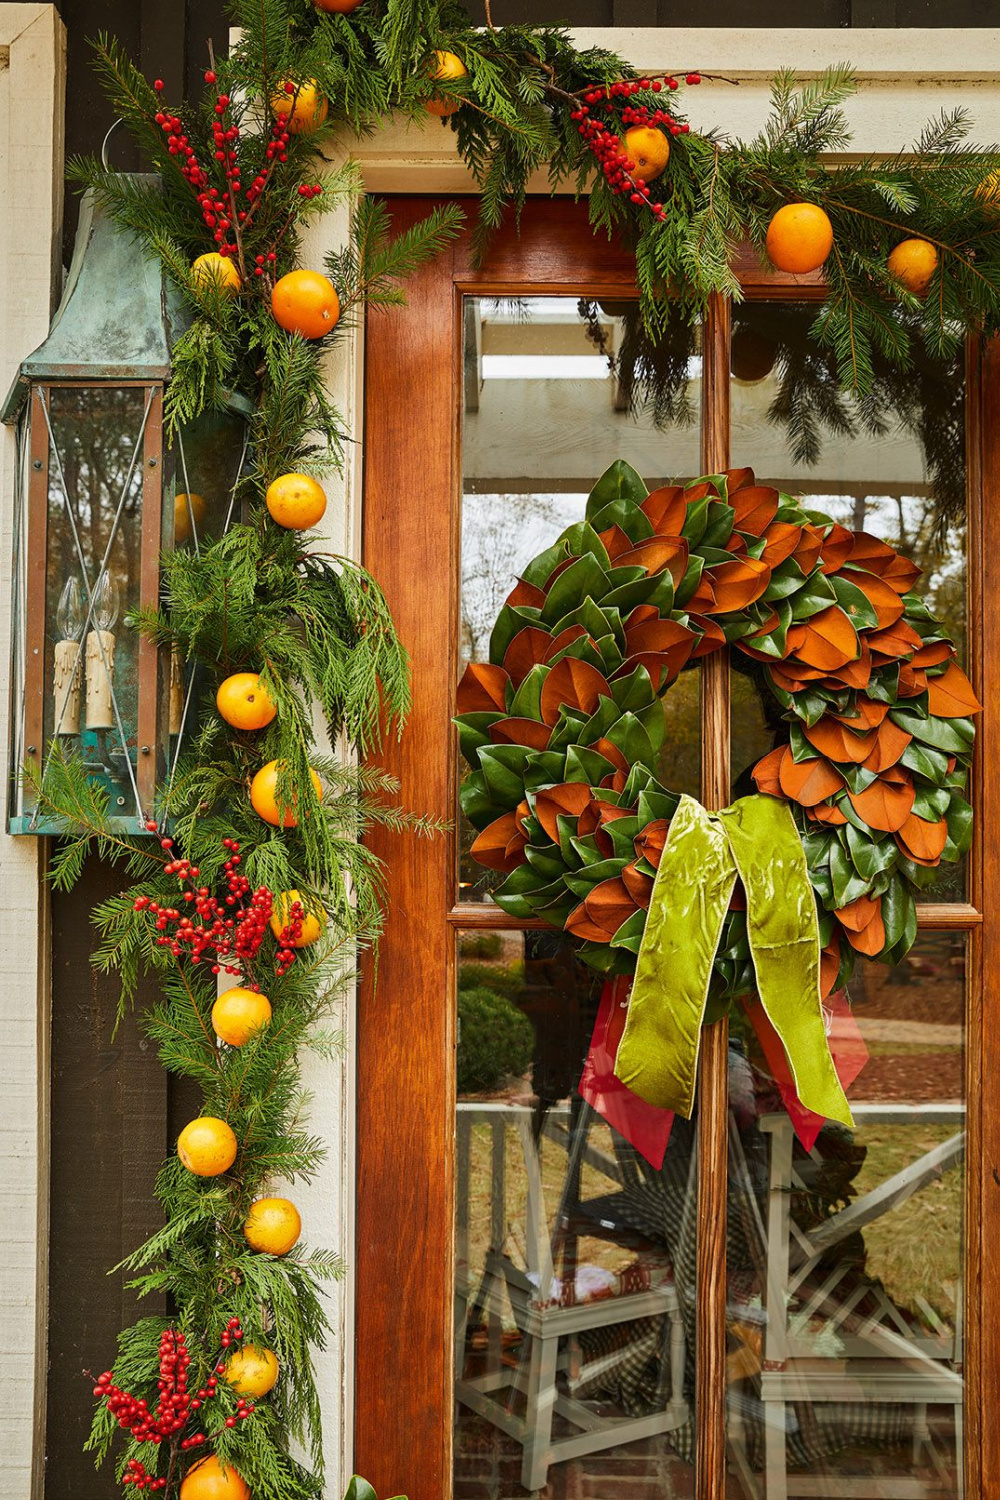 Beautiful magnolia leaf holiday wreath with ribbon and citrus garland adorning door - from CELEBRATING HOME (Gibbs Smith, 2022). #magnoliawreath #christmaswreaths